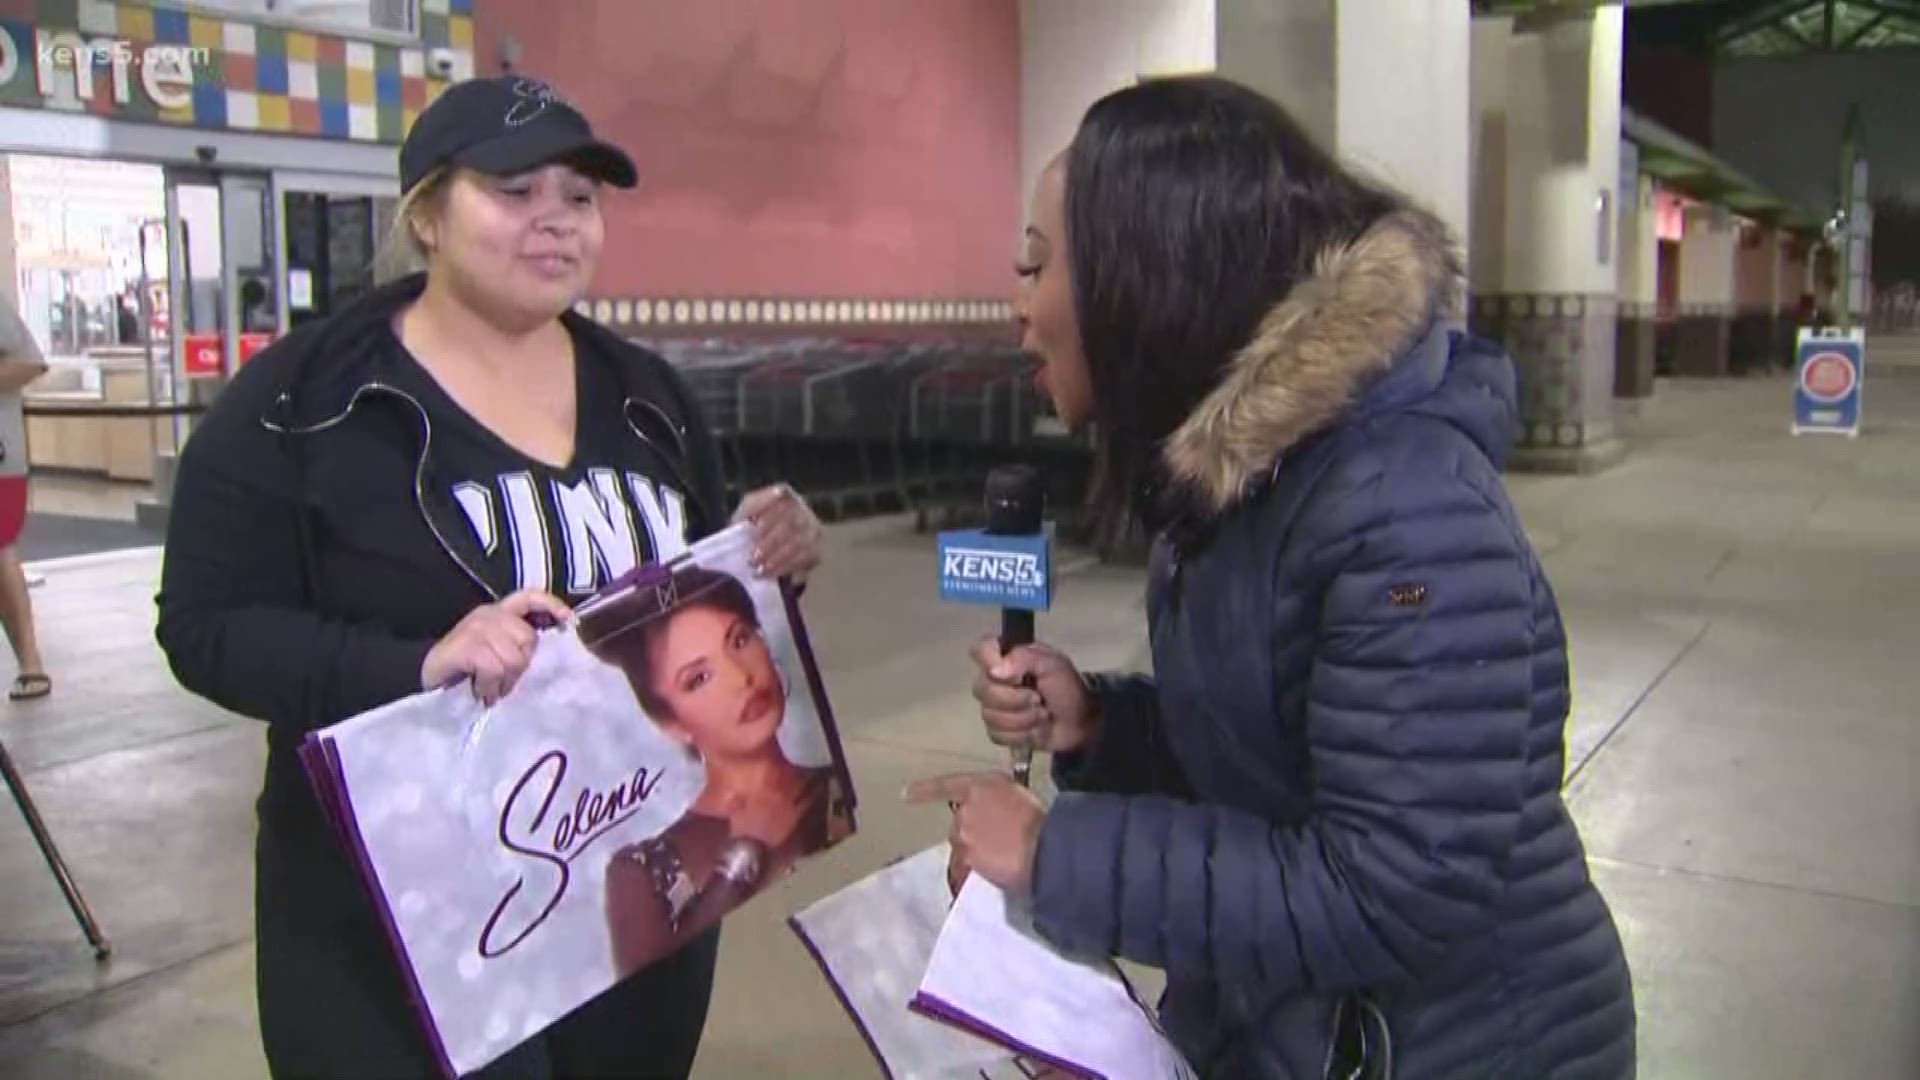 HEB released the official Selena bag Thursday morning. Fans lined up early to get their hands on the popular item.